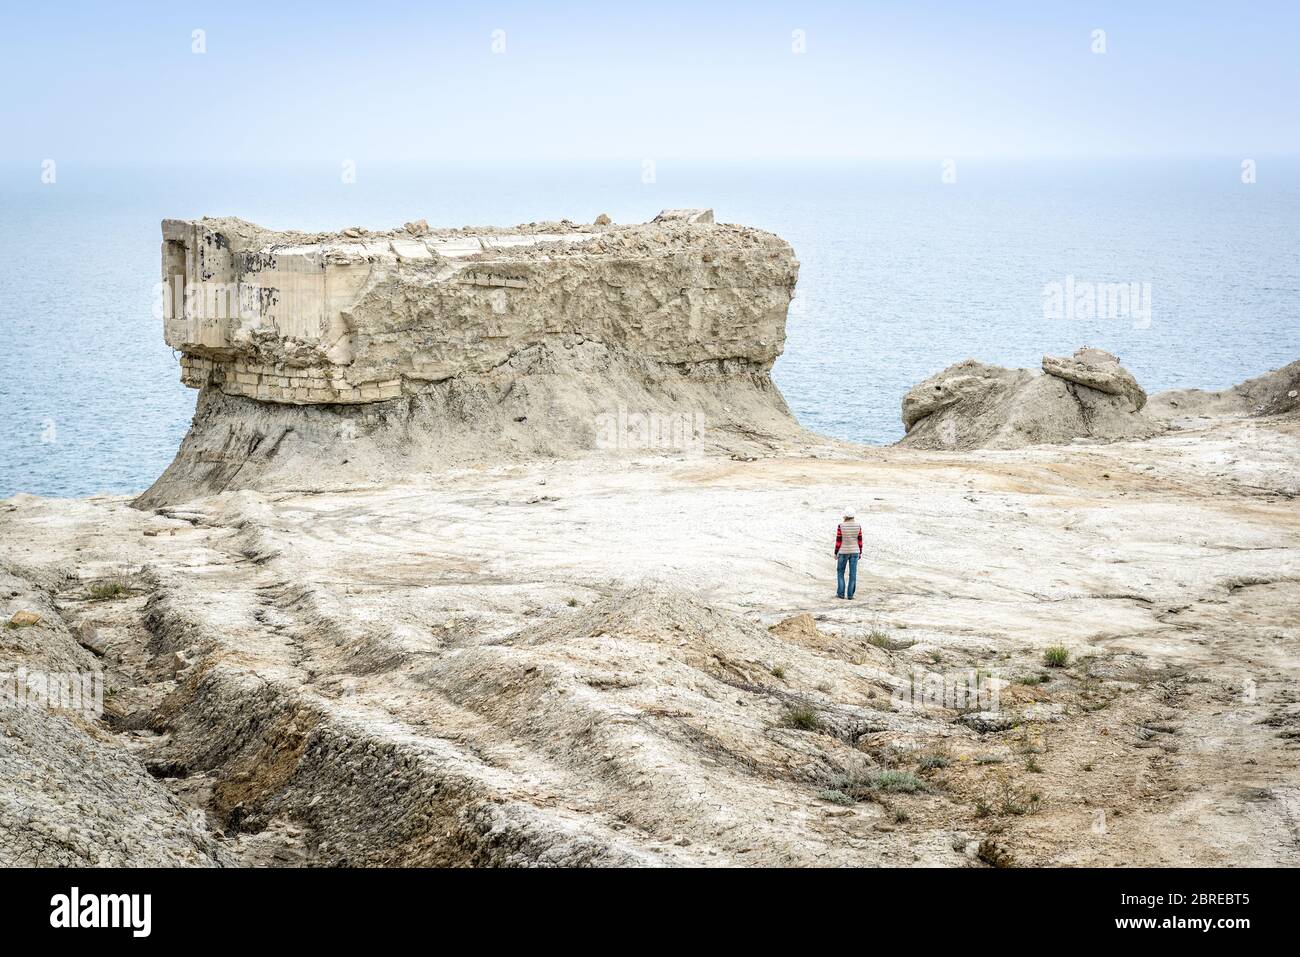 Excavated fortifications from the Second World War in Feodosia, Crimea, Russia. Traveler walks among the ruins on the deserted Crimea coast. The post Stock Photo